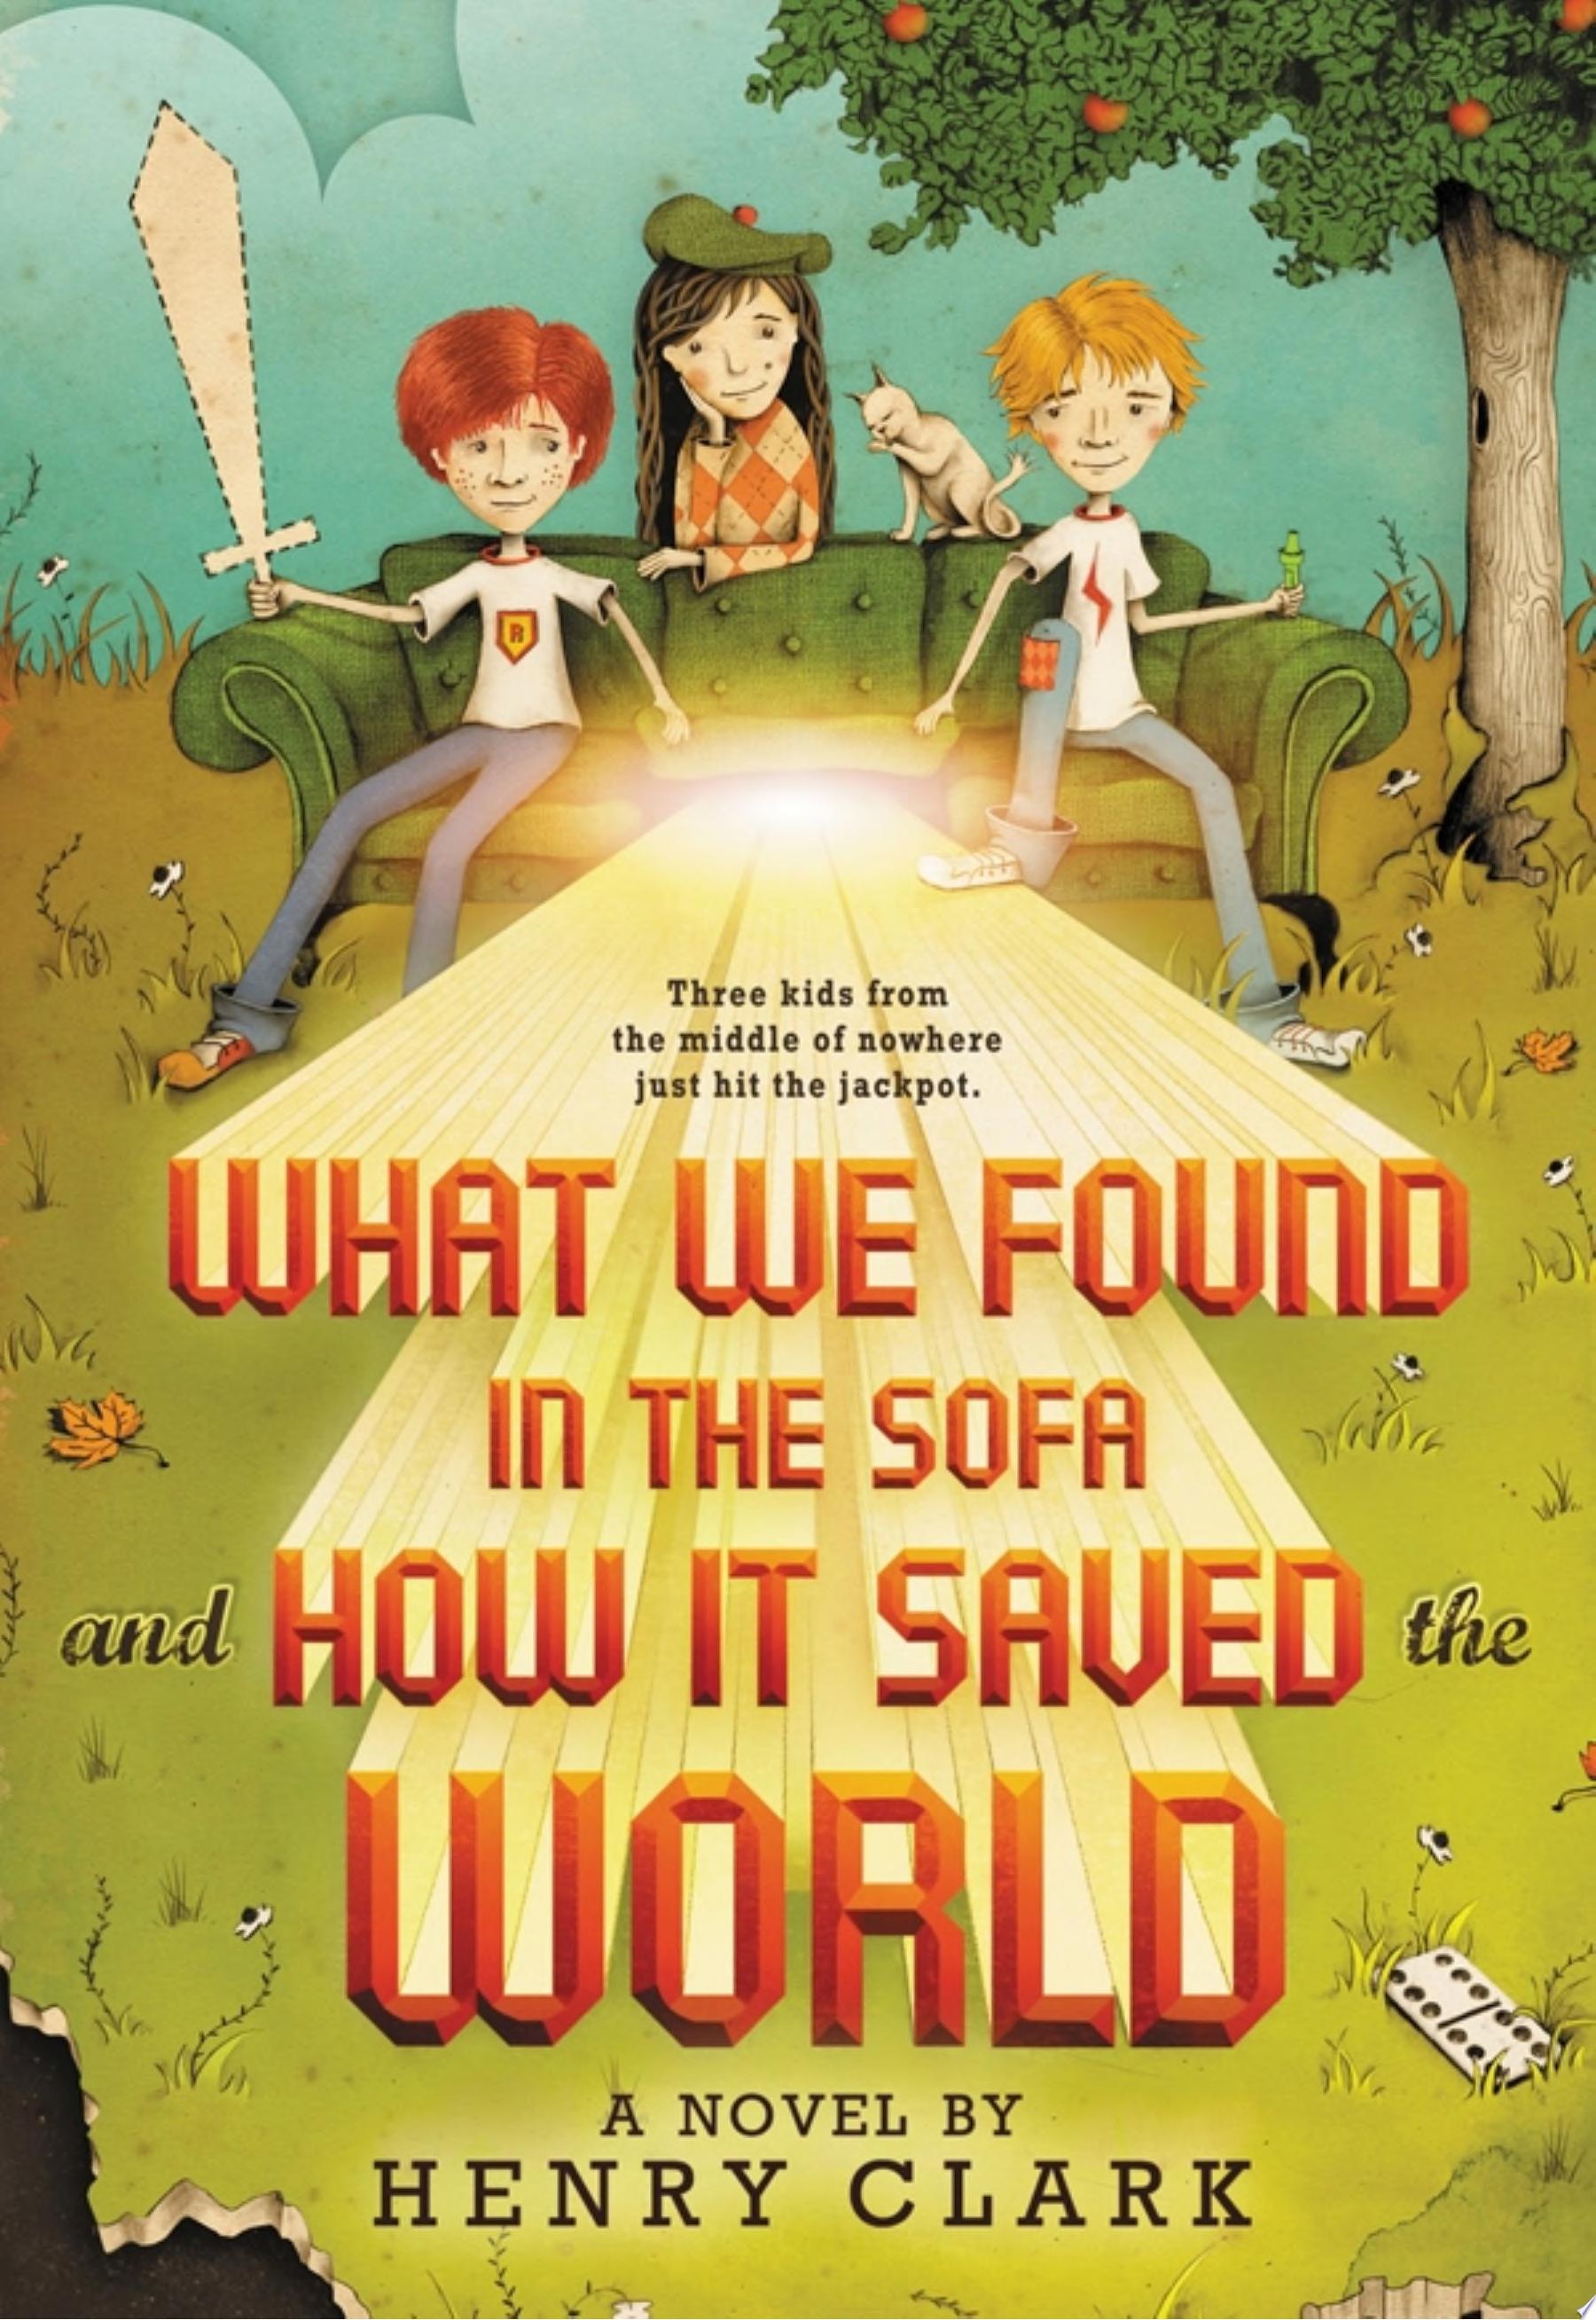 Image for "What We Found in the Sofa and How It Saved the World"